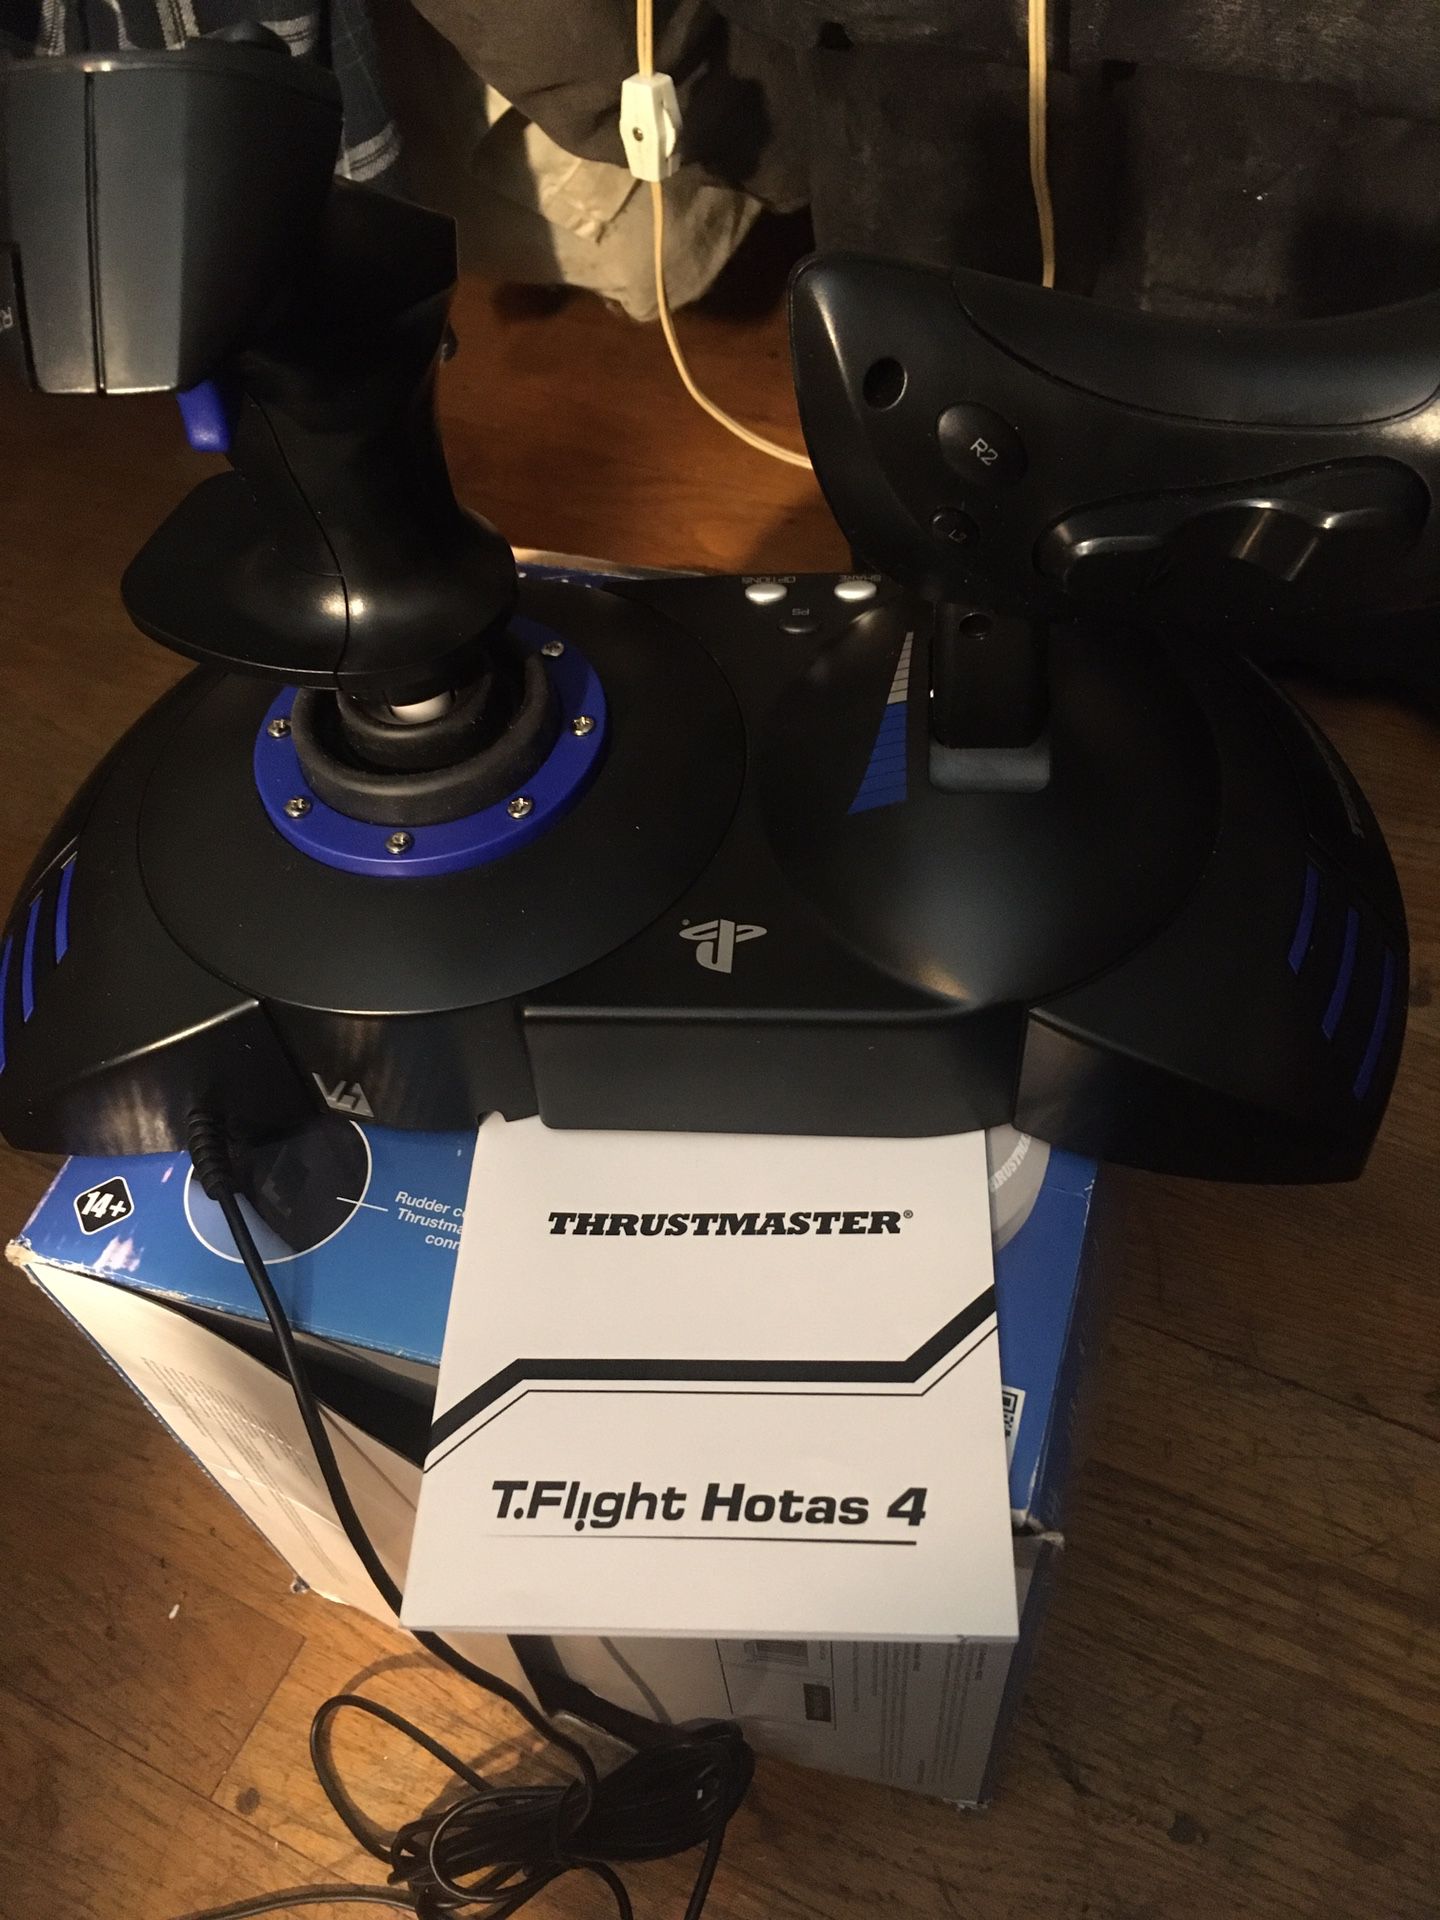 PS4 THRUSTMASTER GAME CONTROLLER. NEW IN THE BOX. $20. HMU {contact info removed}